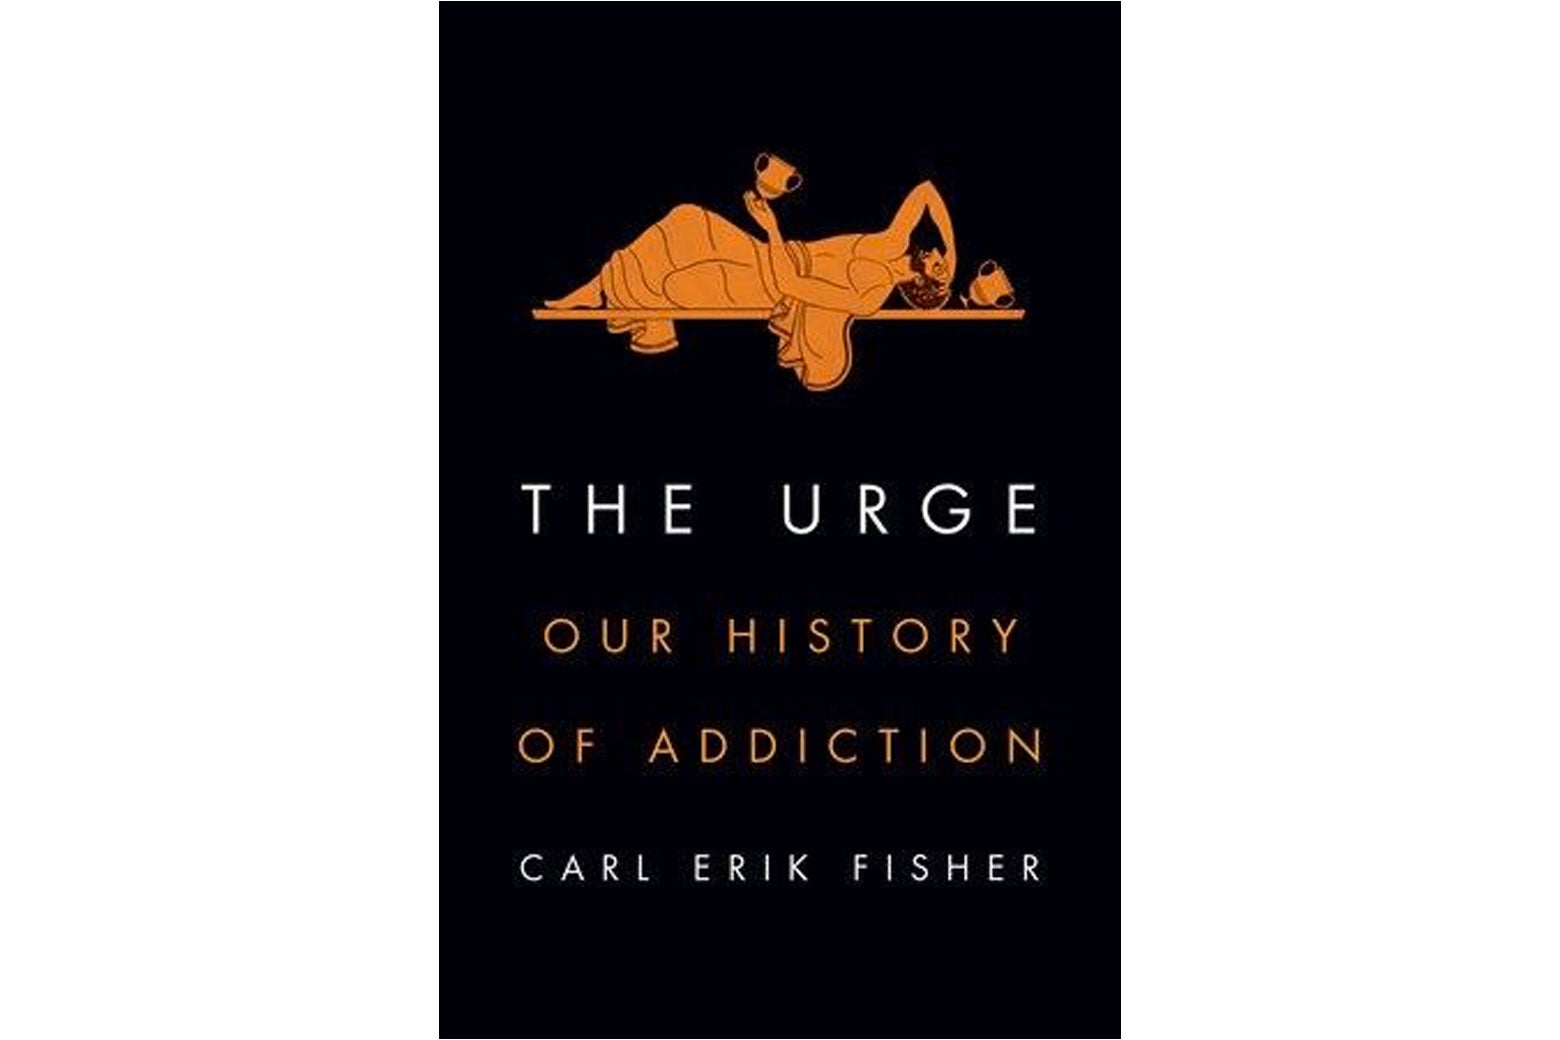 The cover of The Urge: Our History of Addiction by Carl Erik Fisher shows an Ancient Greek-style woman laying down with her hand on her head and a goblet in her hand.